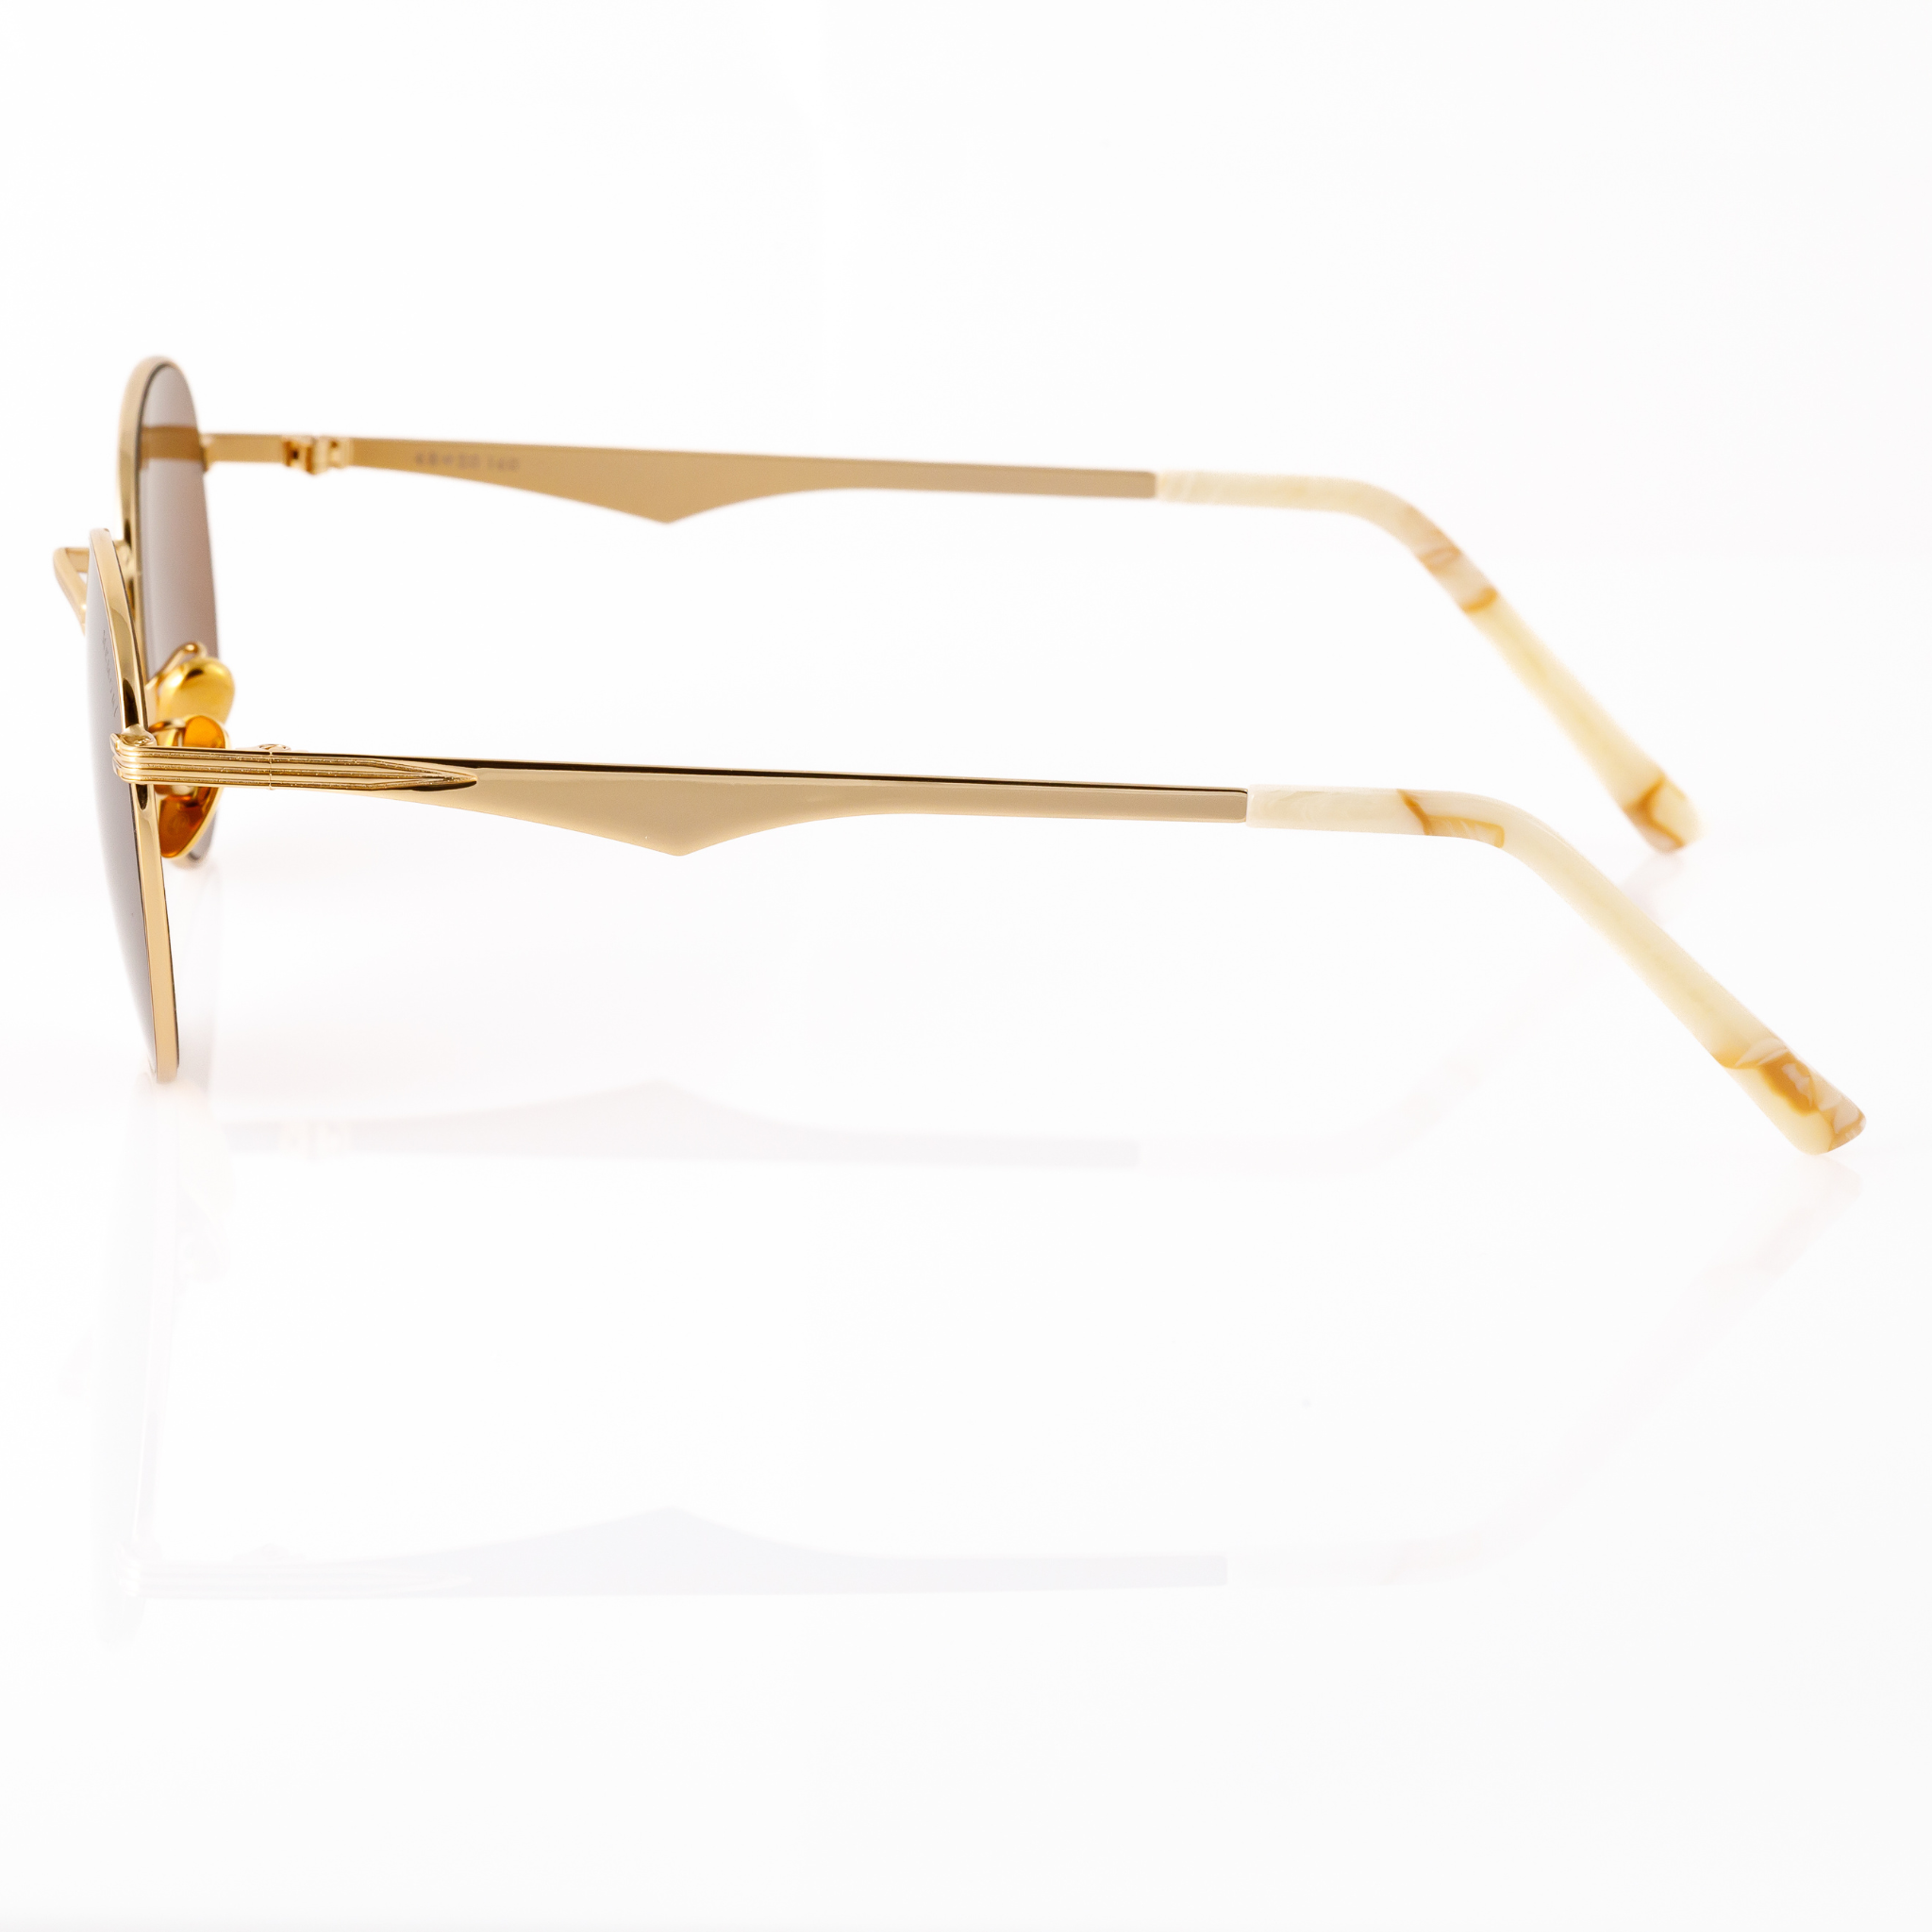 Profile view of Memorí round sunglasses in gold with warm brown lenses. Linear pointed design that wraps from hinge to temple arm is featured as well as scalloped temple arm. Ivory colored marbled mazzucchelli temple tips. Small fit sunglasses designed specifically for petite and narrow faces. Best sunglasses for small faces. 